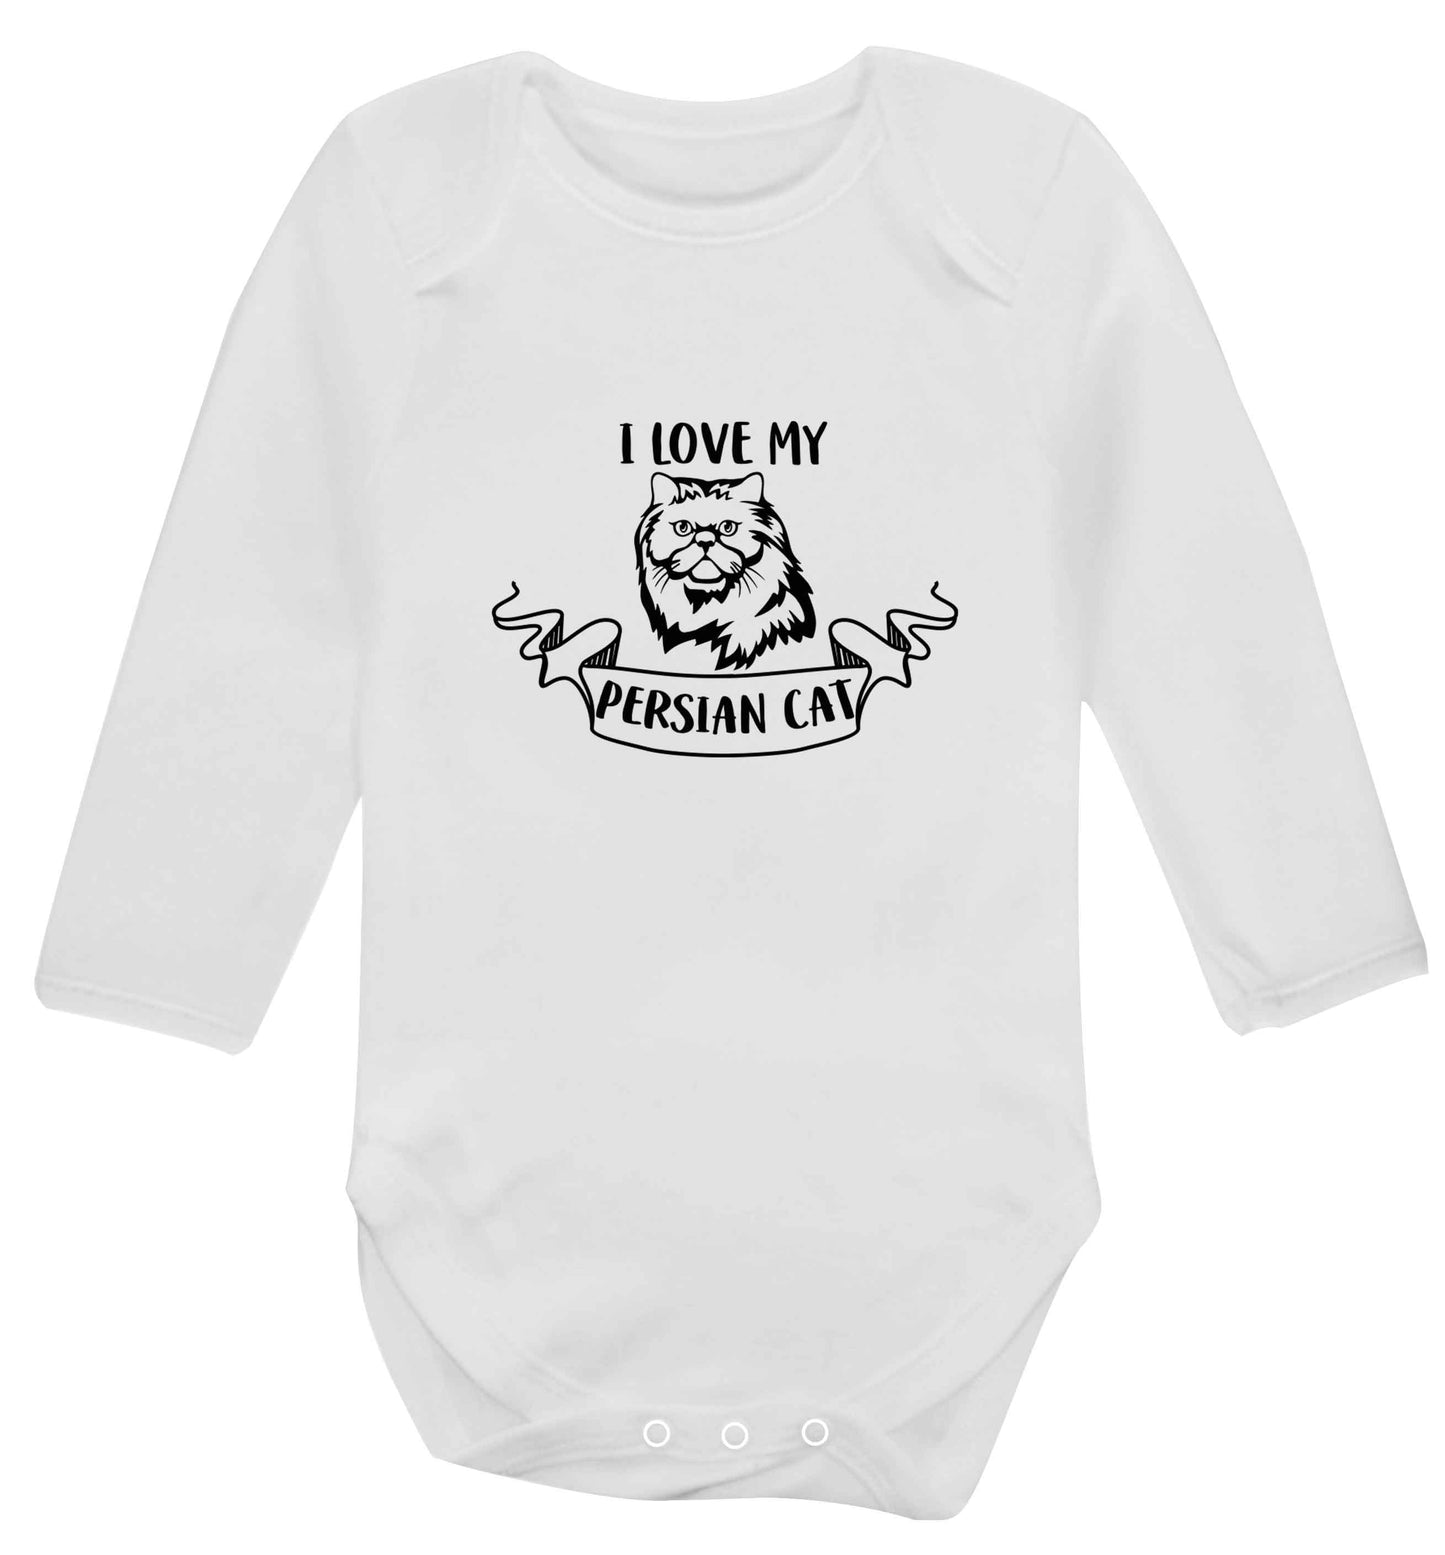 I love my persian cat baby vest long sleeved white 6-12 months